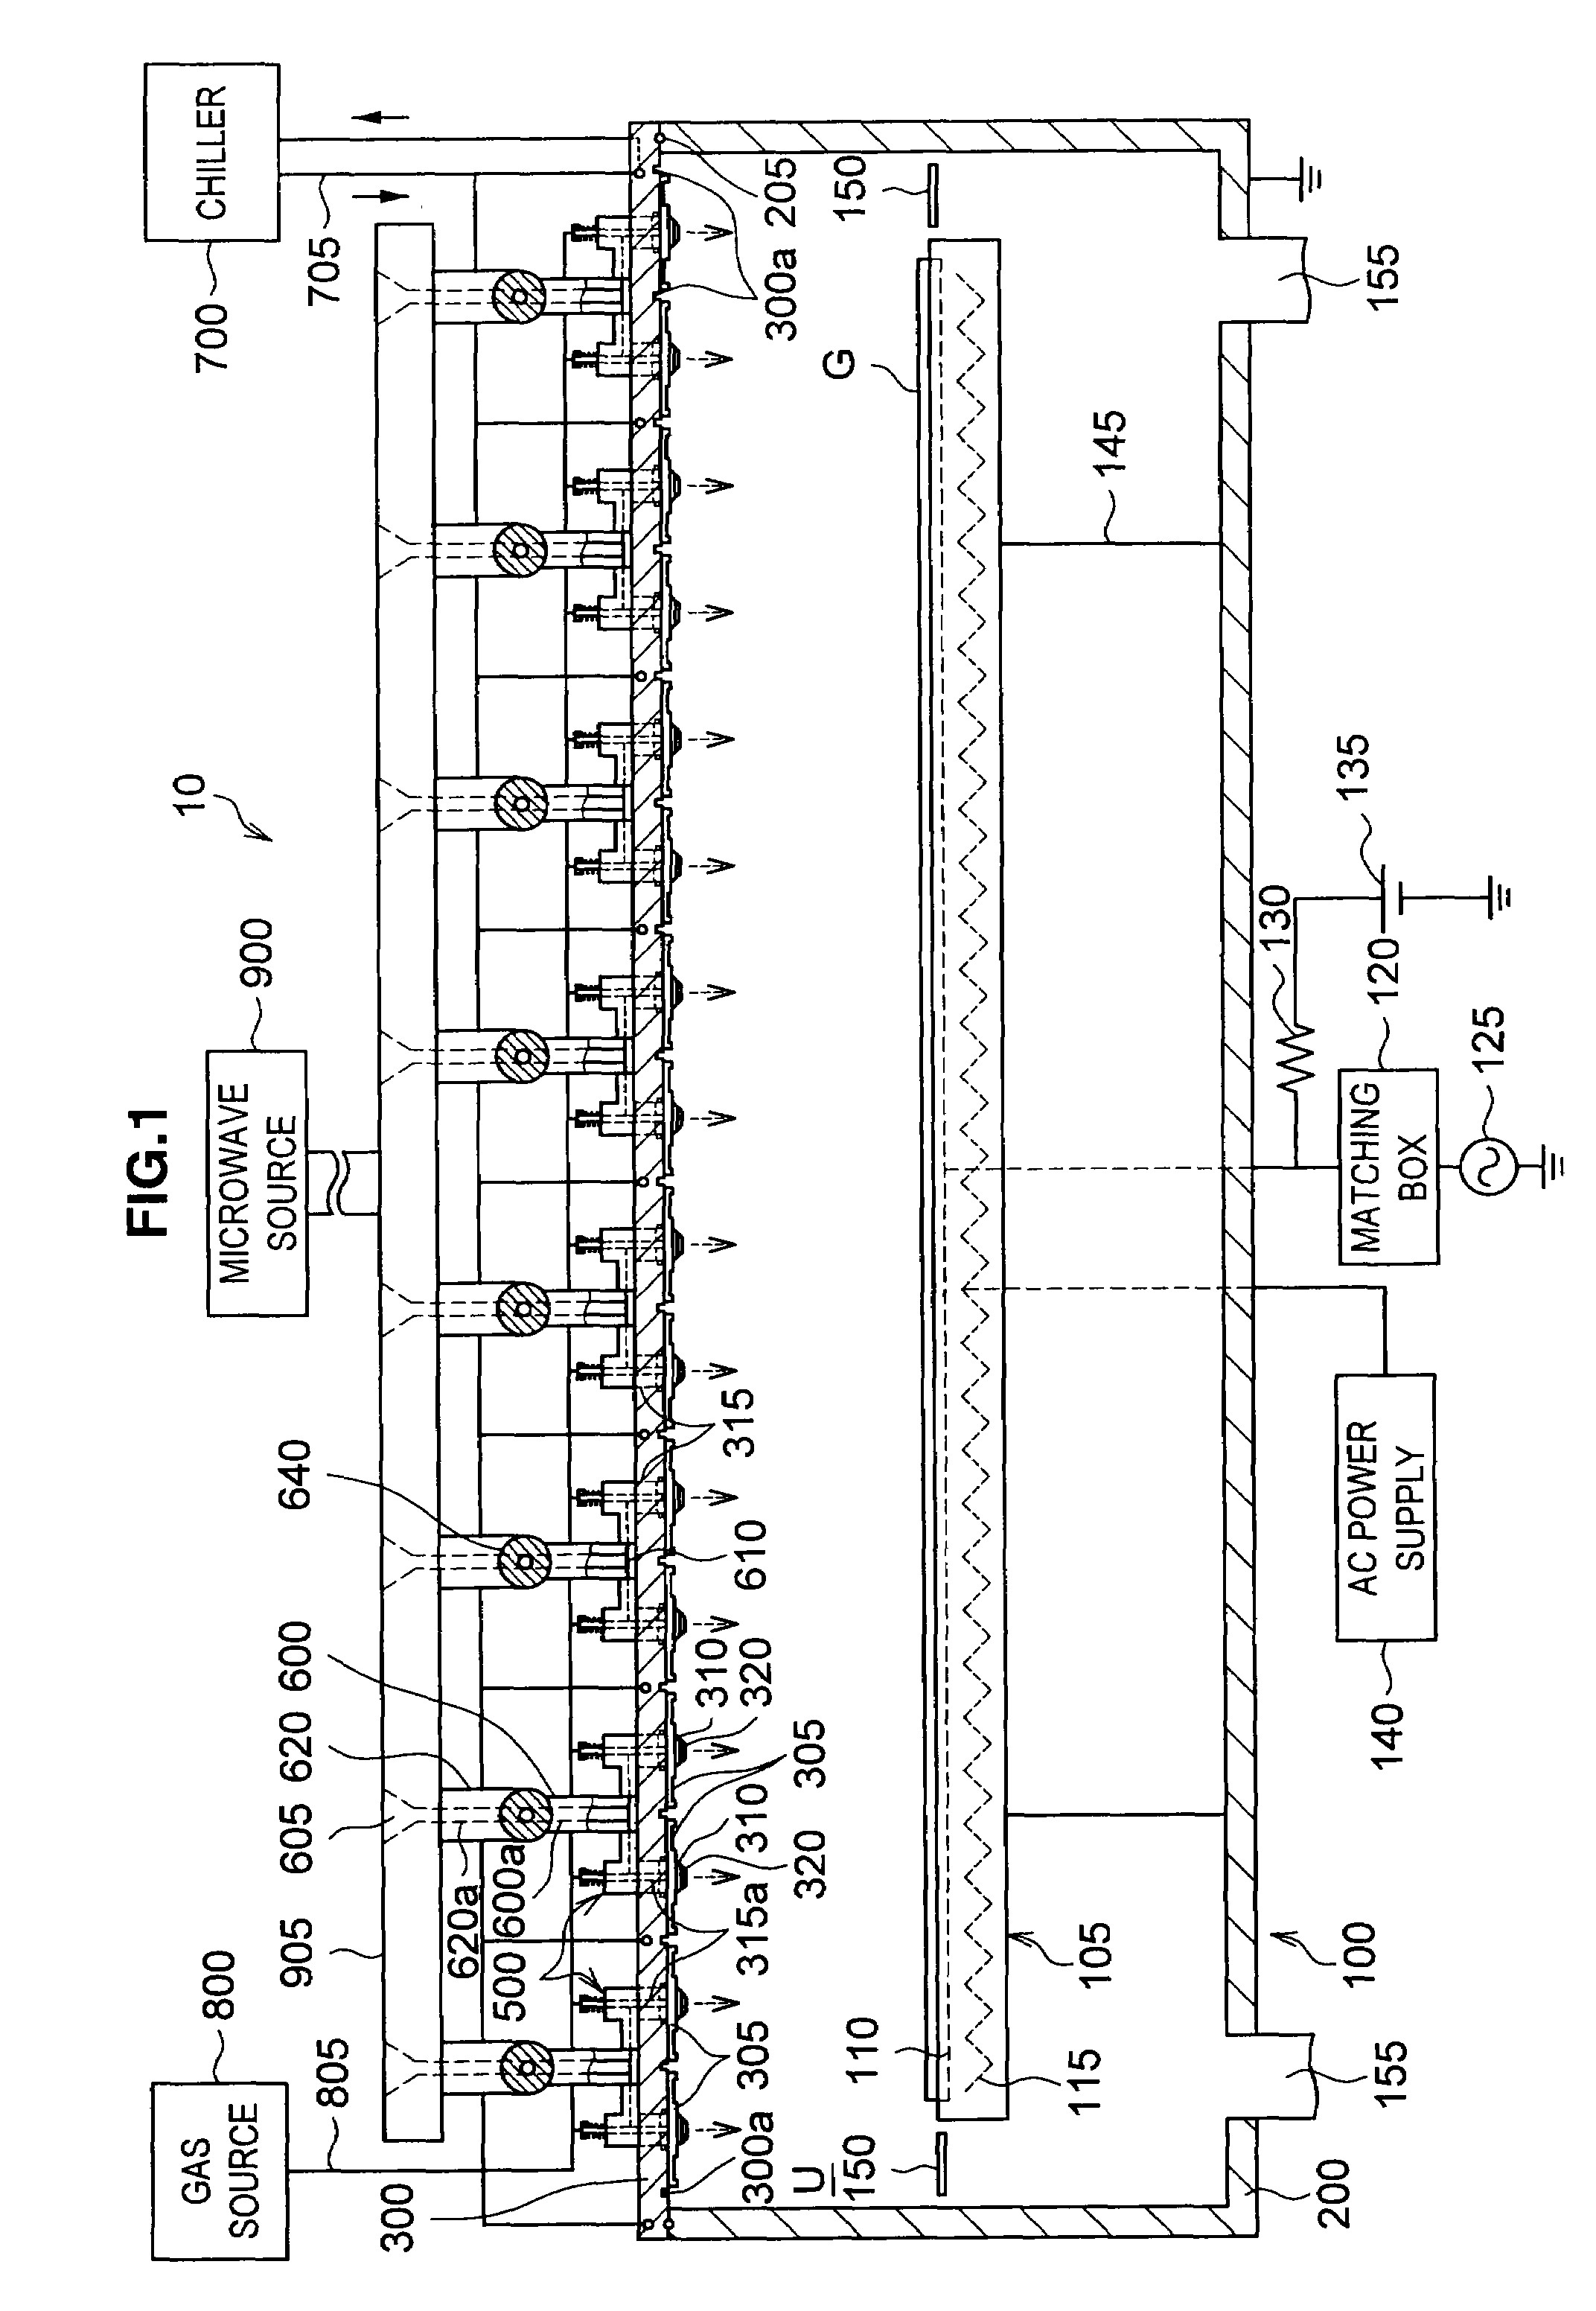 Plasma processing system and use thereof